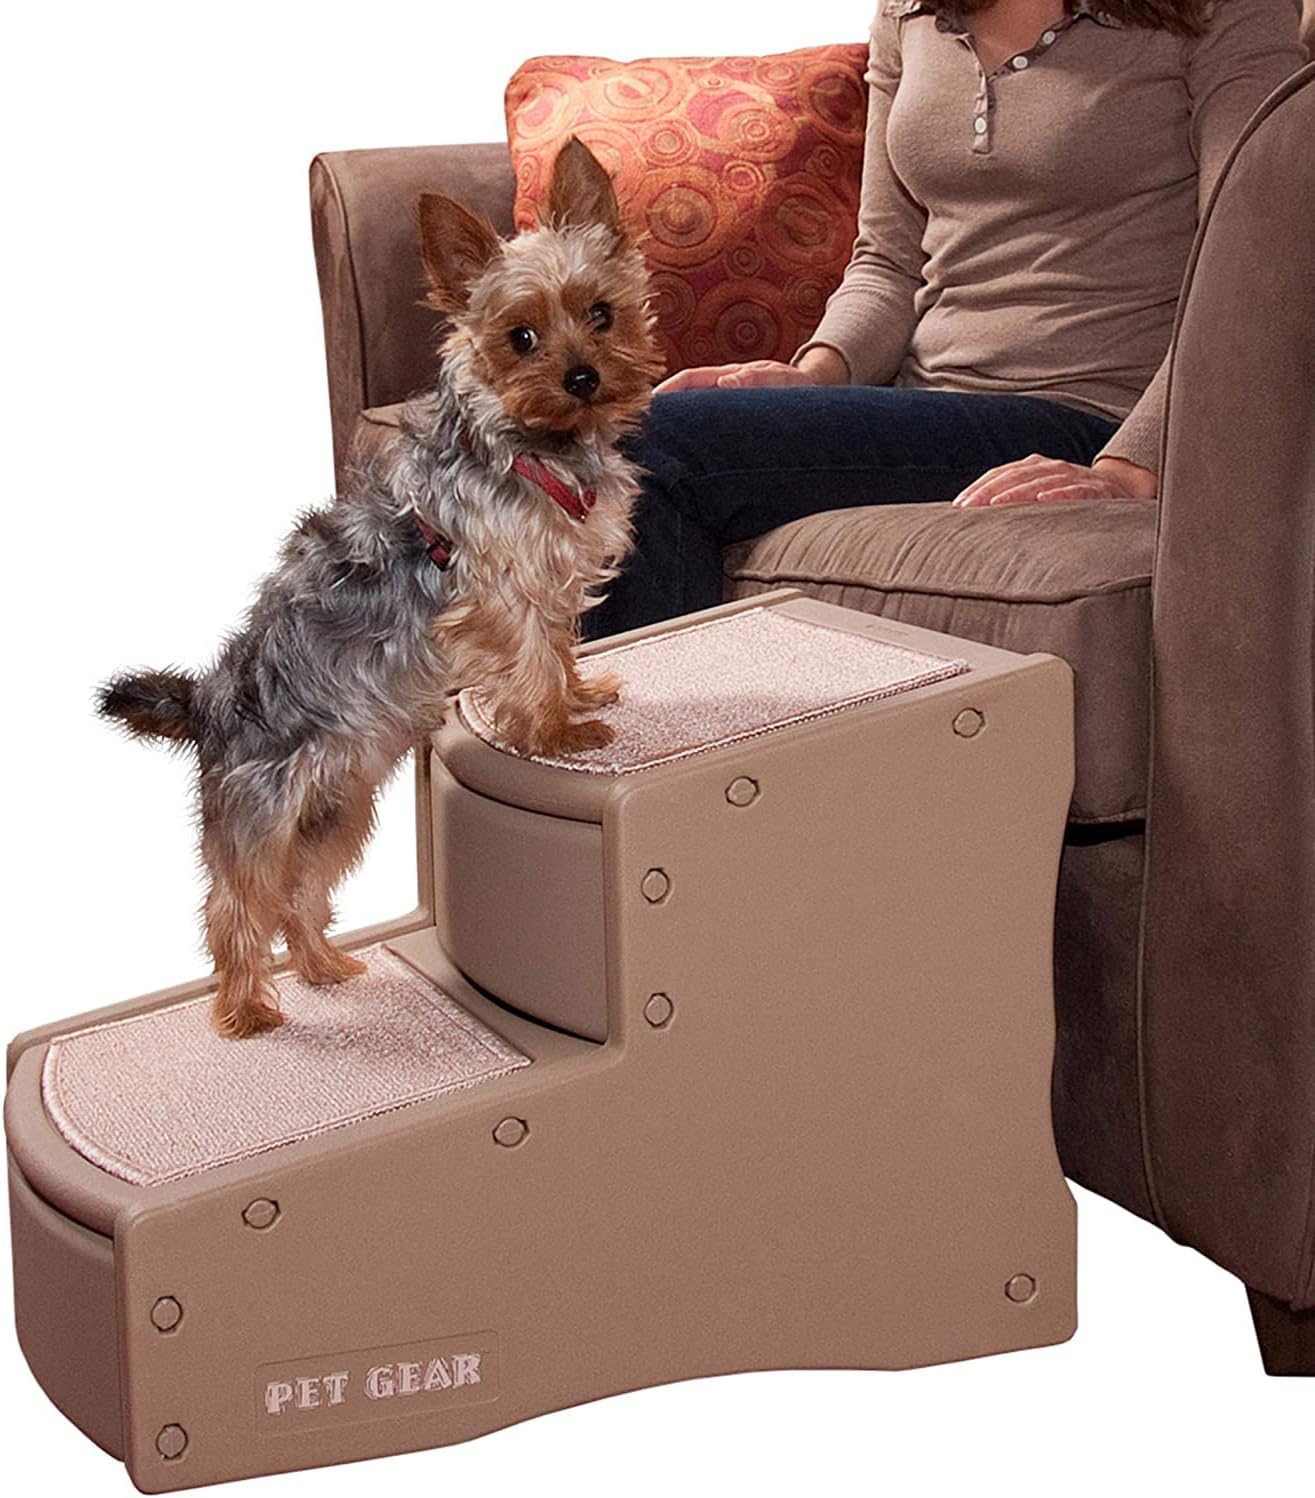 Pet Gear Easy Step II Pet Stairs, 2 Step for Cats\/Dogs up to 150 Pounds, Portable, Removable Washable Carpet Tread, No Tools Required, Available in 5 Colors